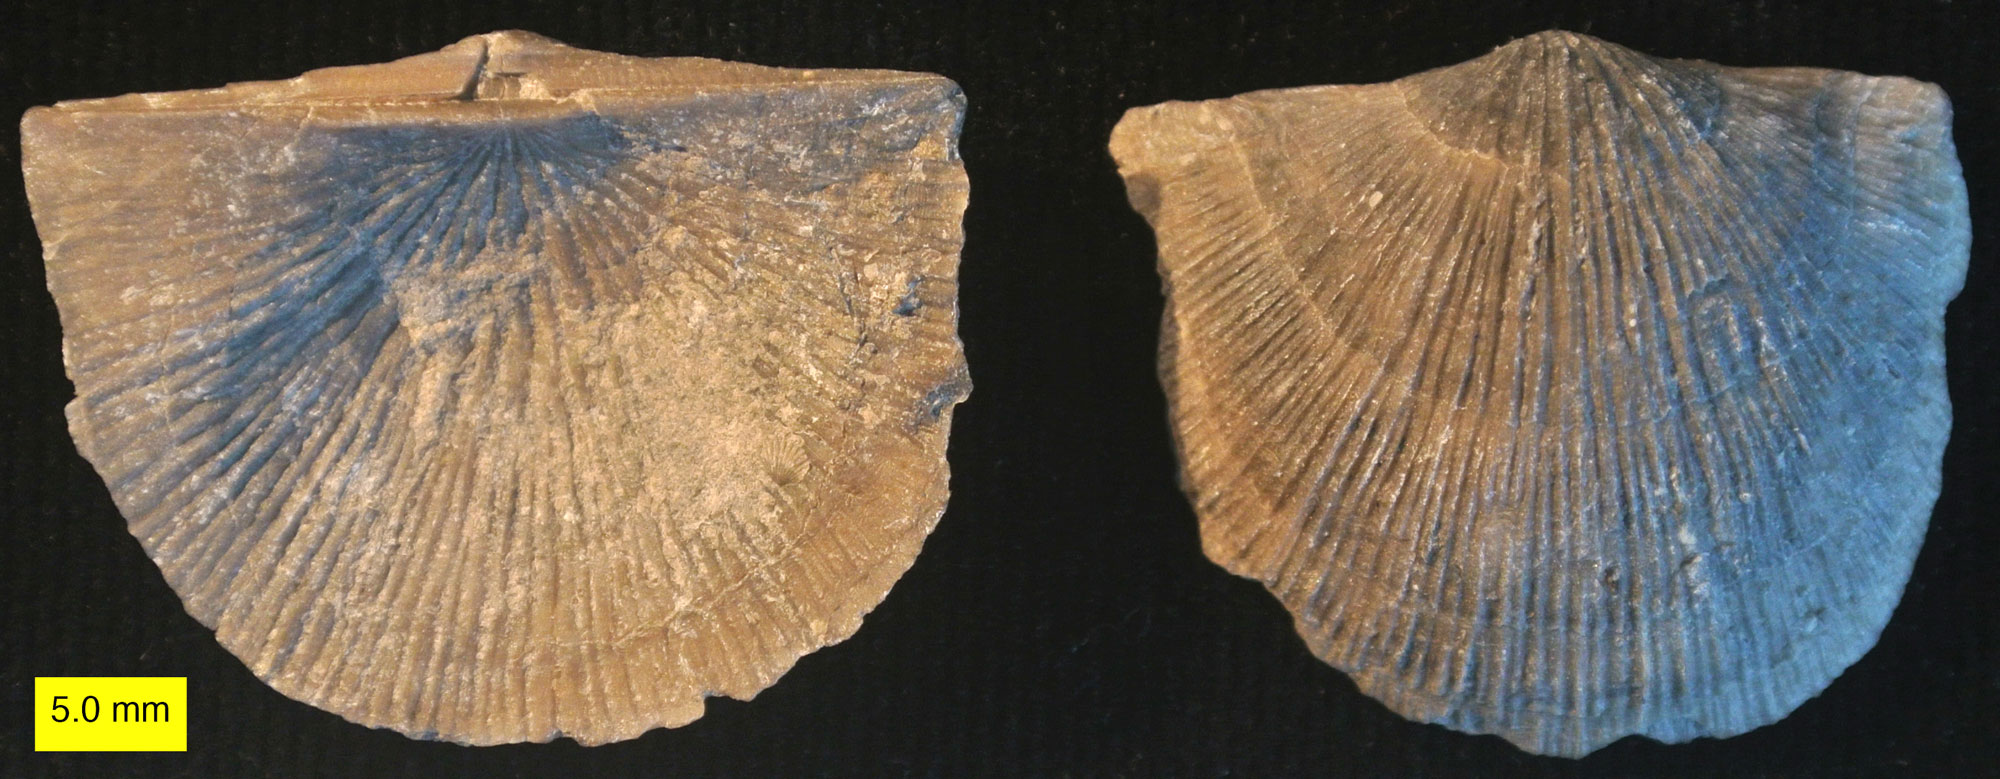 Photograph of a brachiopod from the Devonian of Ohio. The photo shows the lower and upper  surfaces of a brachiopod shell with with fine radiating ridges. The shell is roughly half-circular in shape.